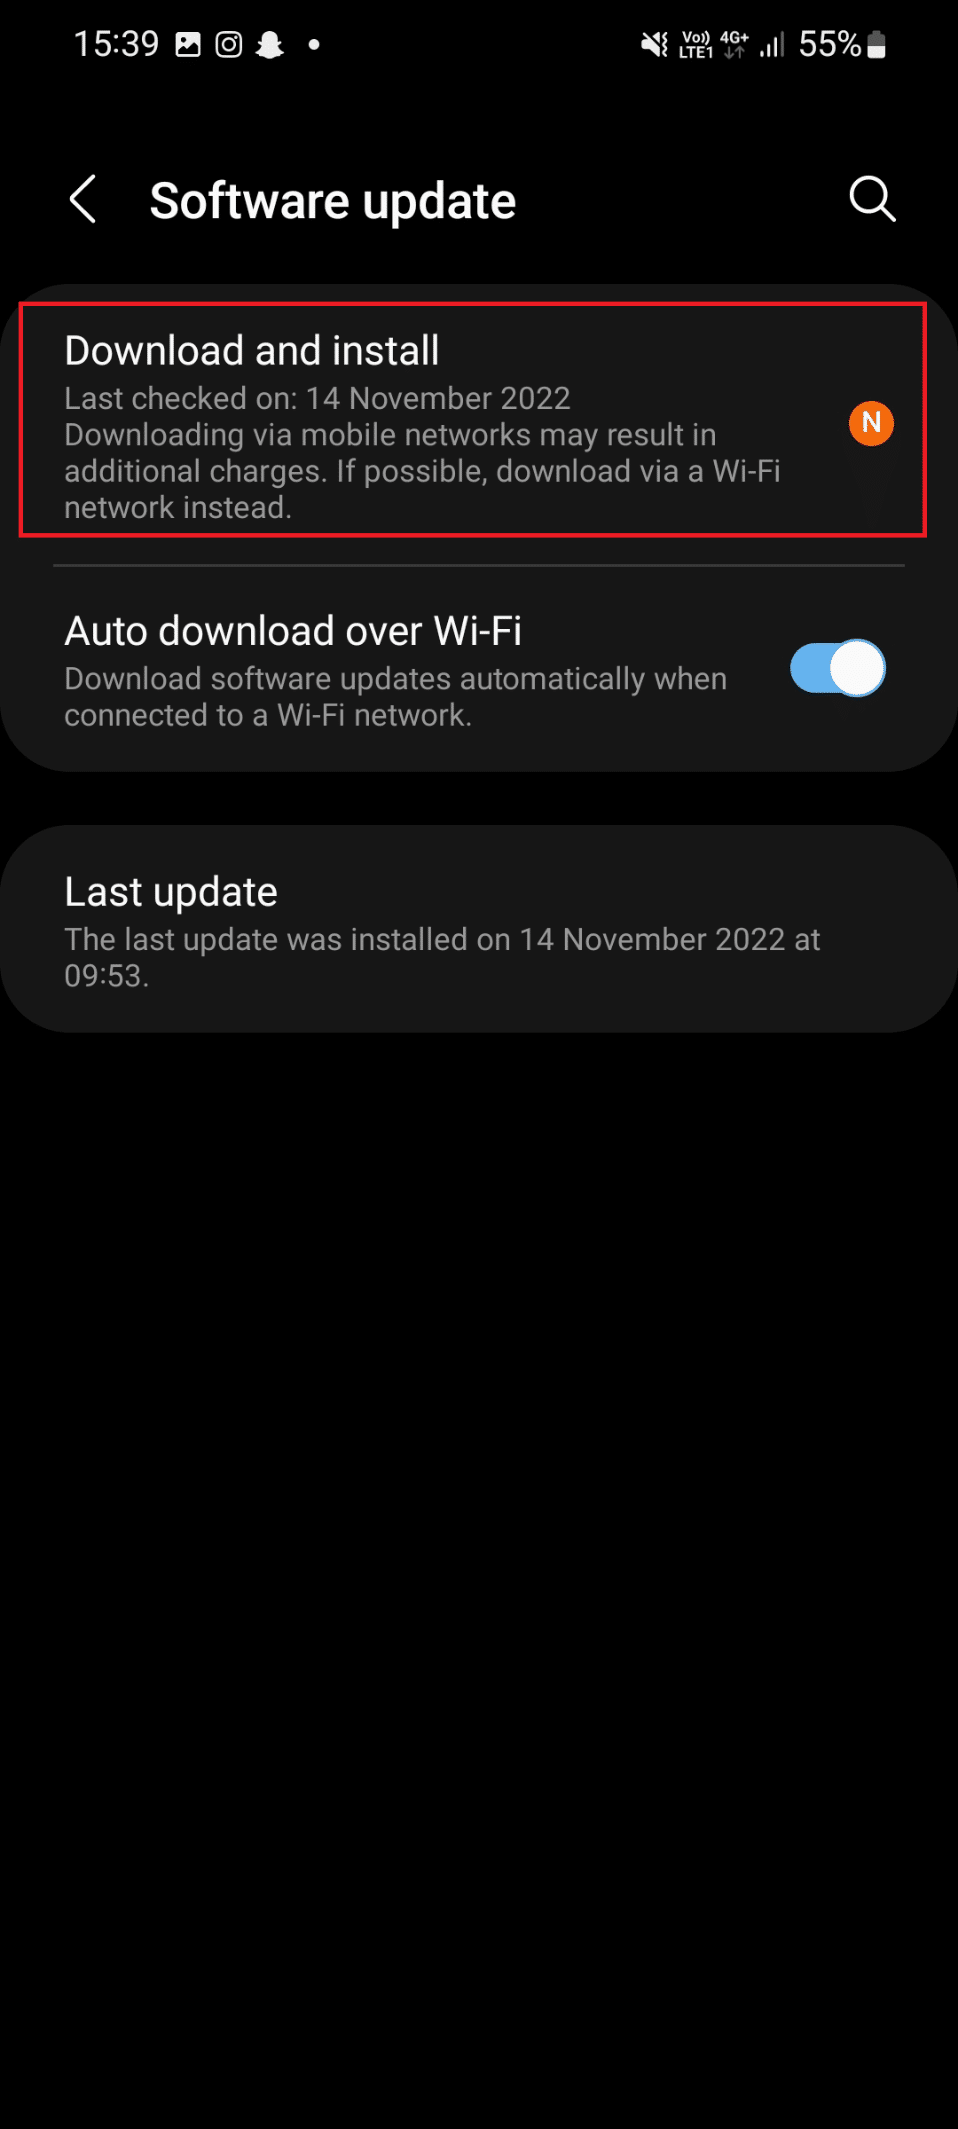 download and install option. Fix You’re Offline Check Your Connection Error on YouTube